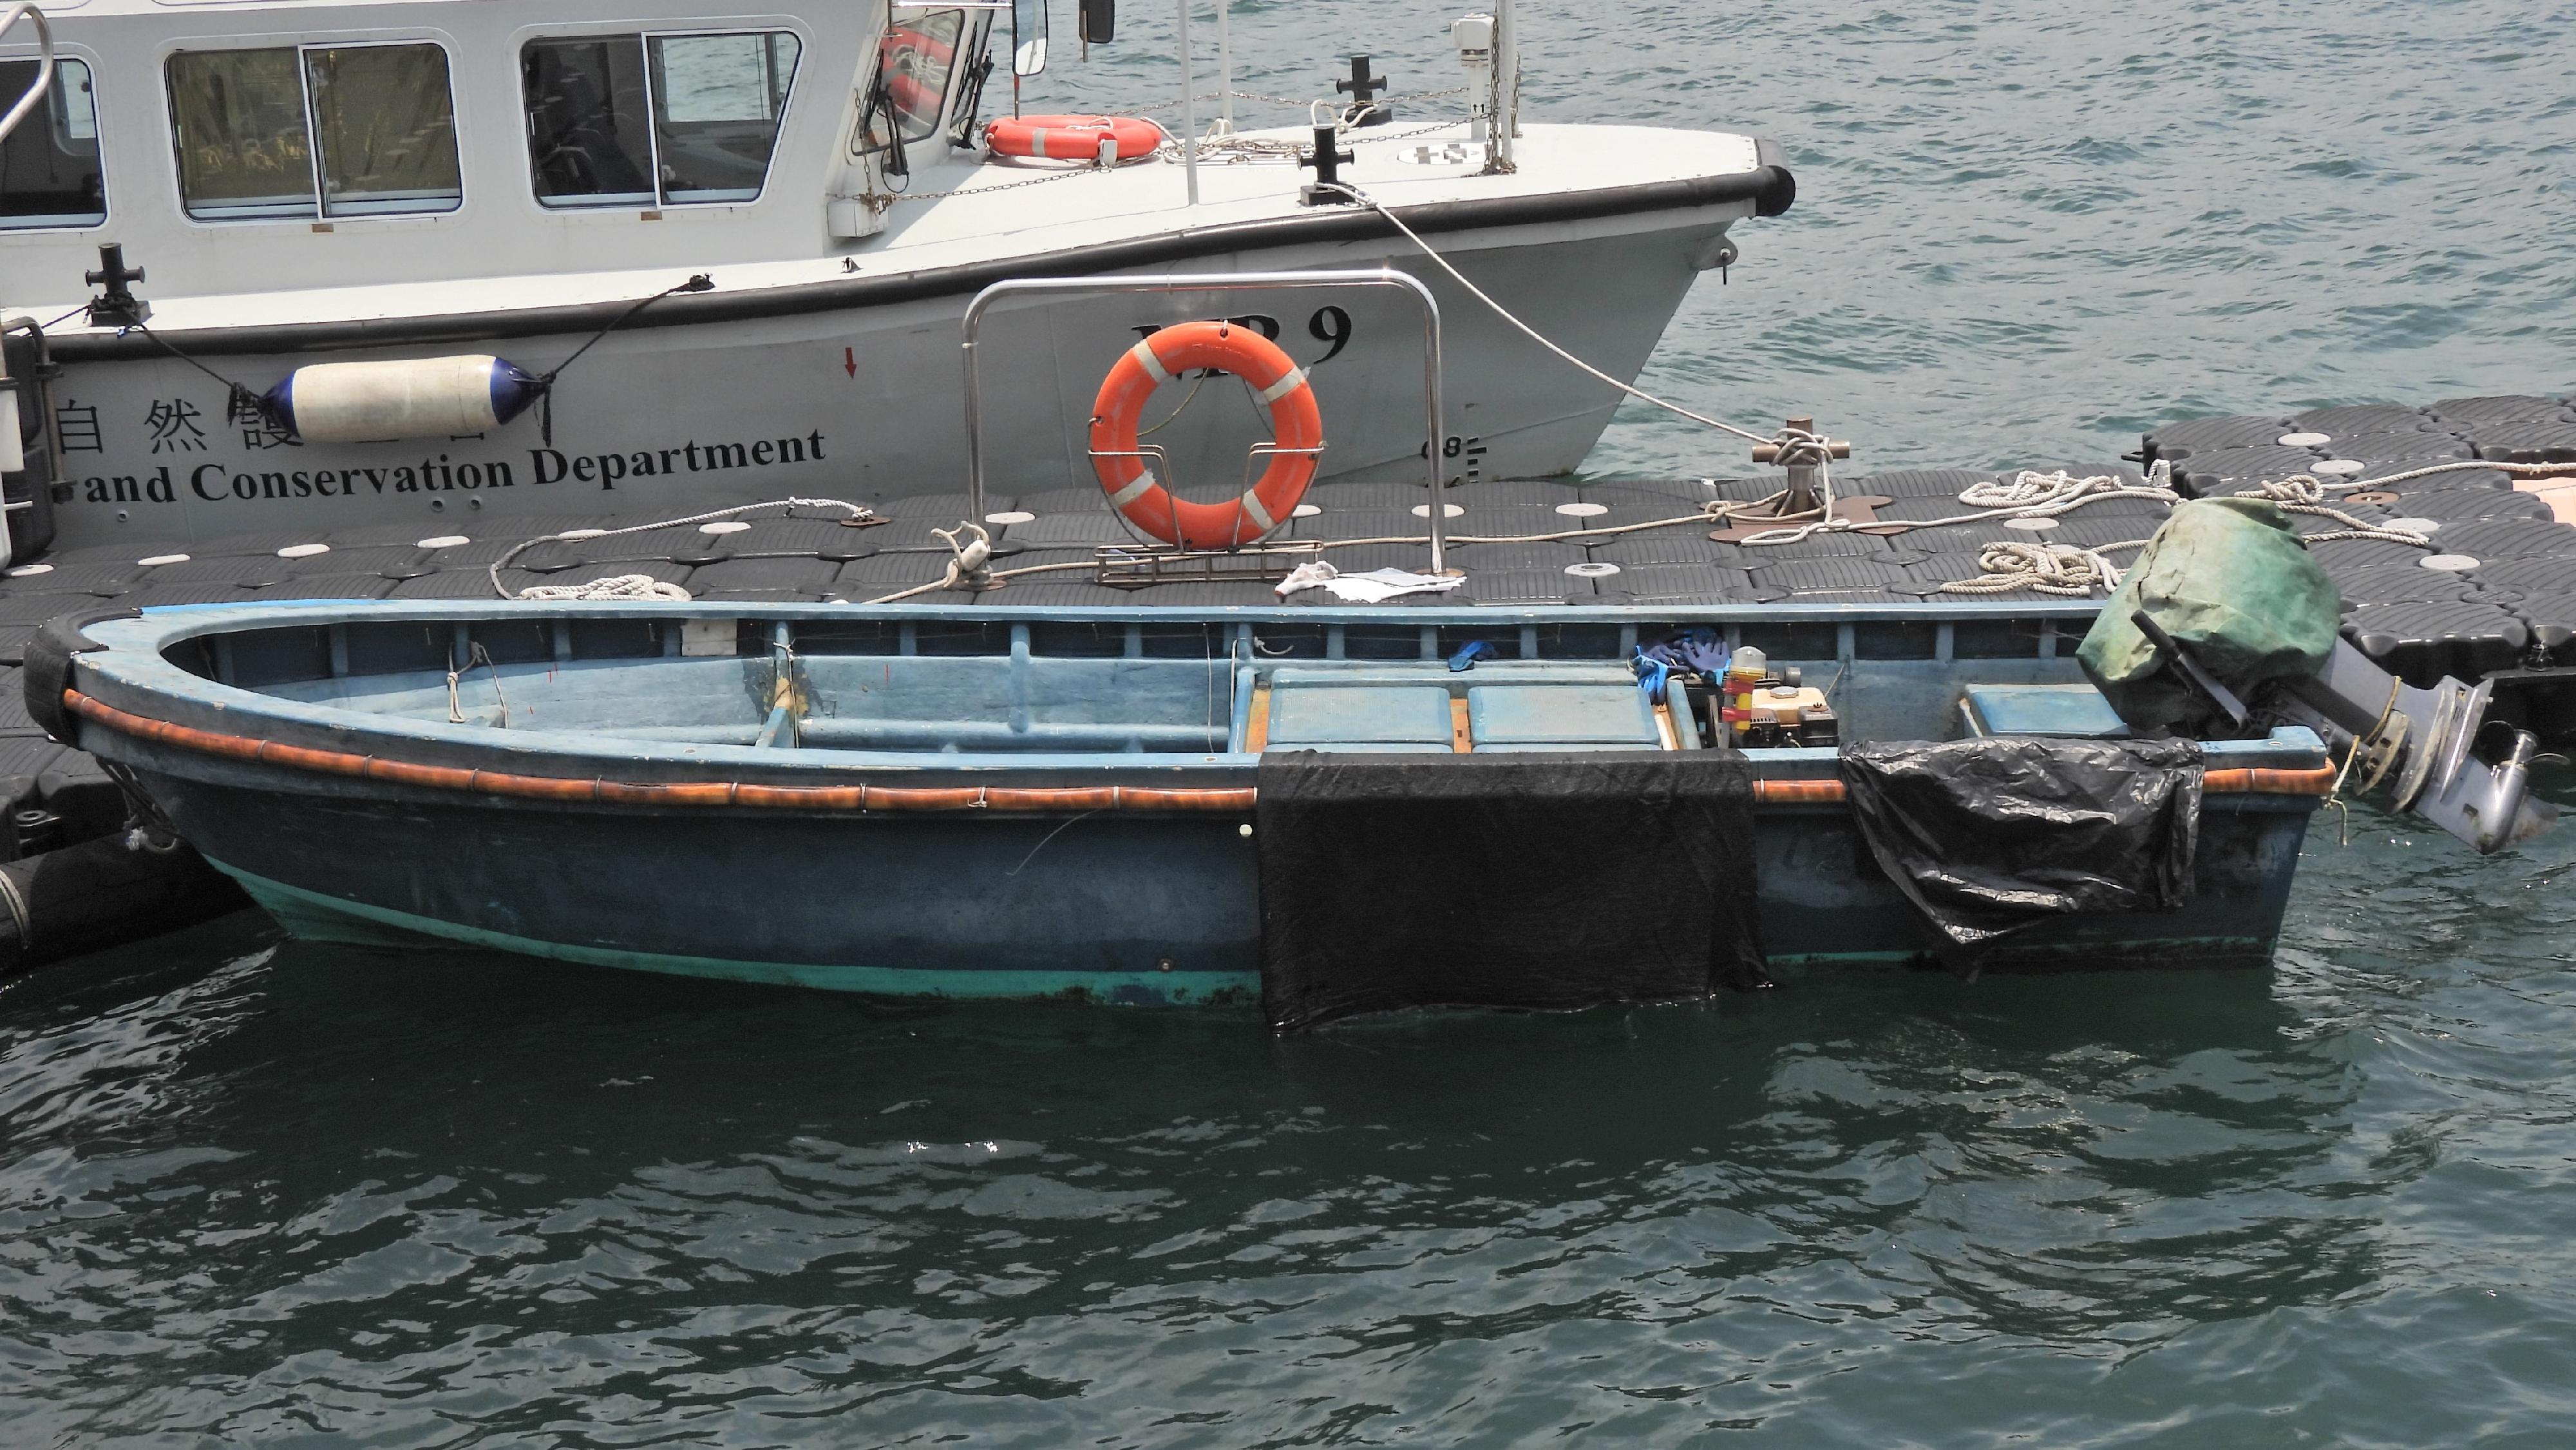 Three Mainland fishermen deckhands who breached the Fisheries Protection Ordinance (Cap. 171) by engaging in illegal fishing earlier in waters near Clear Water Bay in eastern Hong Kong, were convicted today (May 22). Photo shows the fishing vessel.